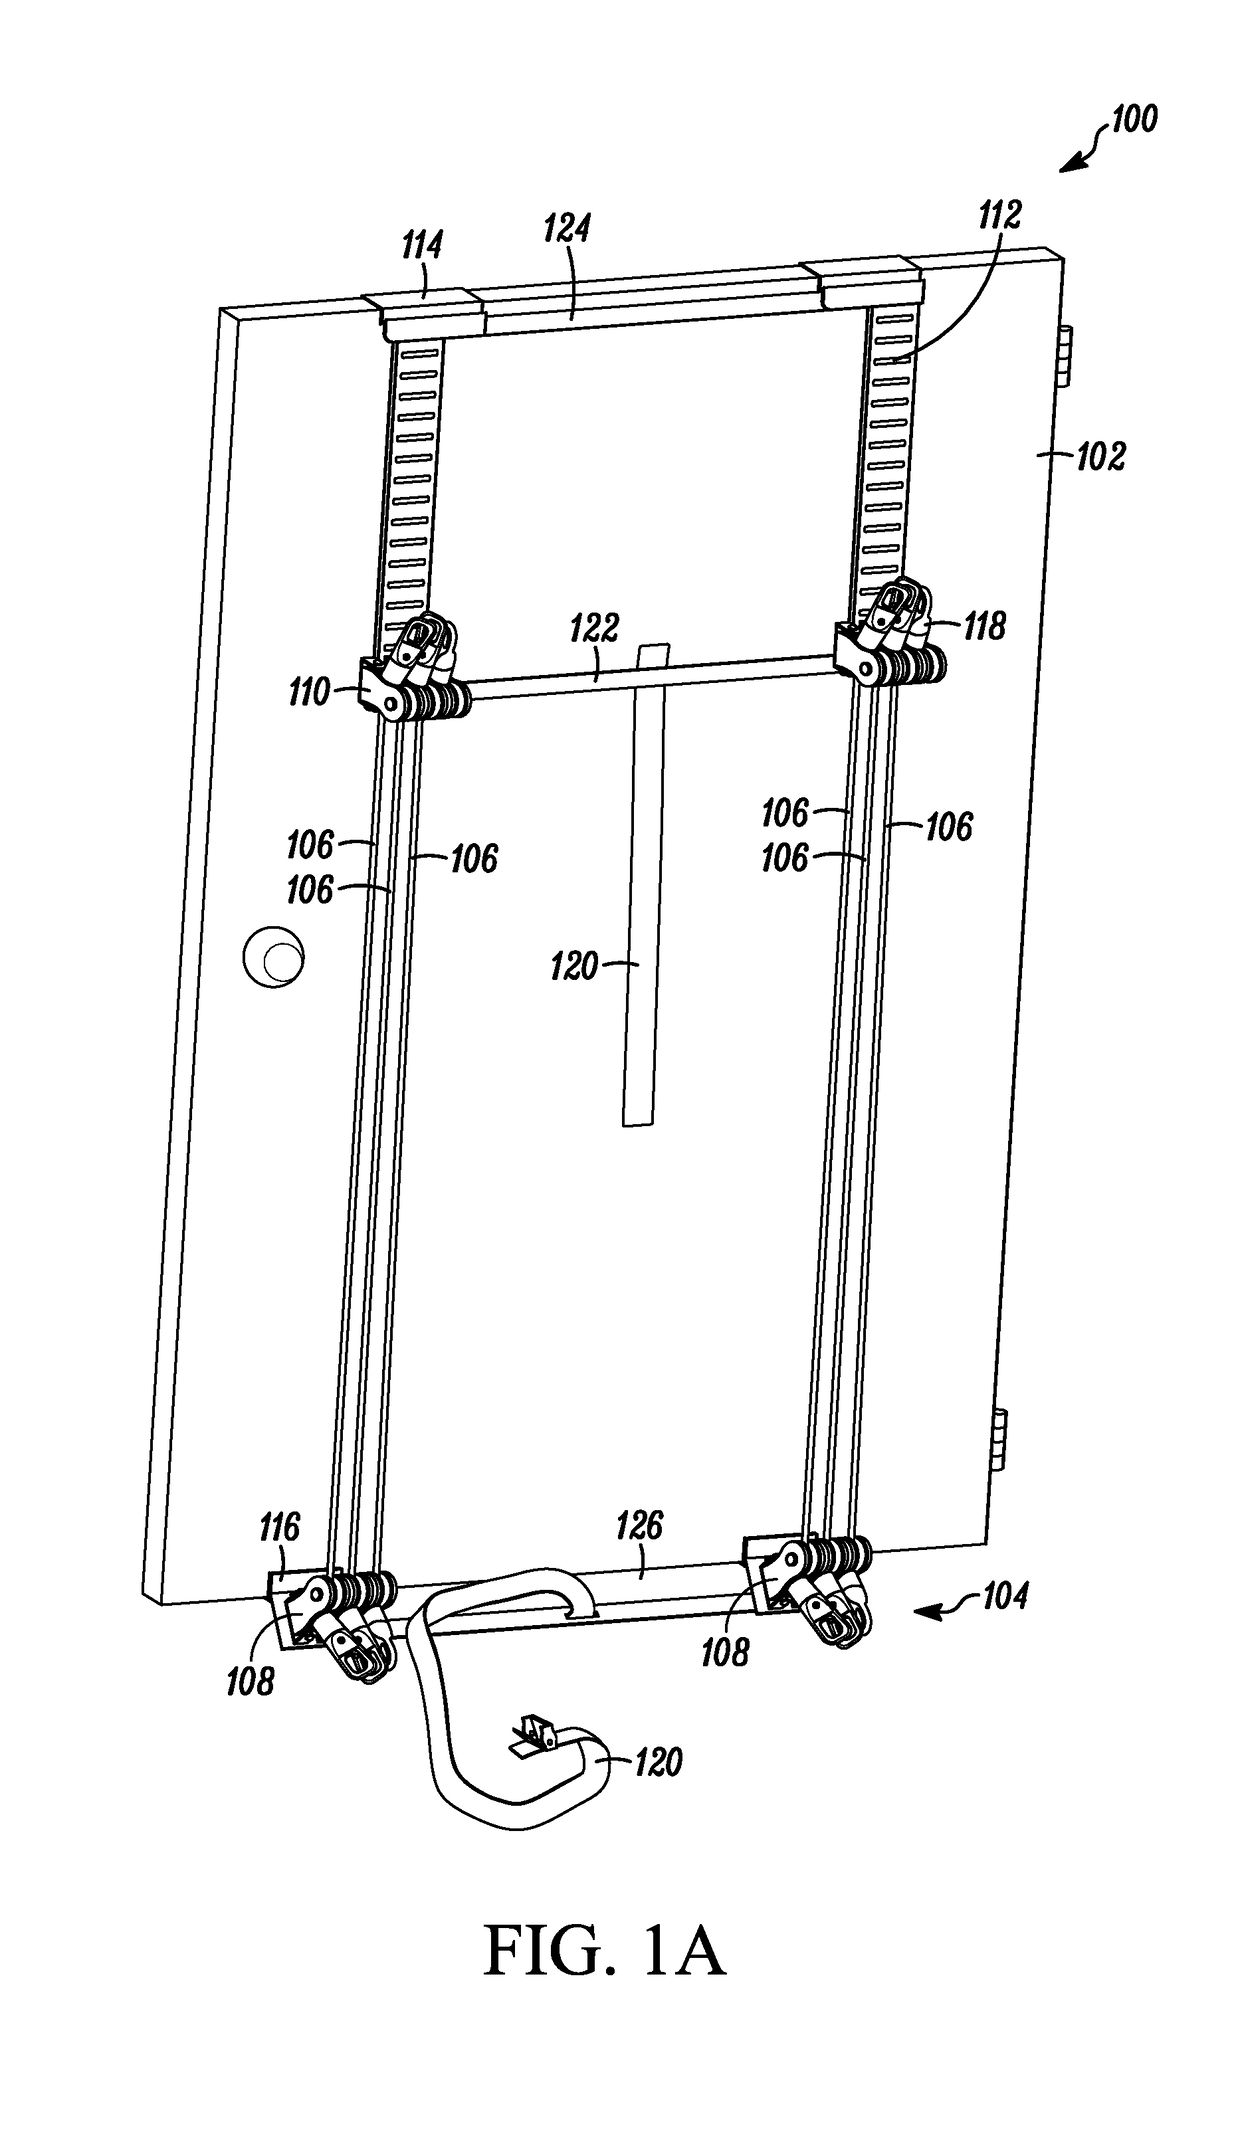 User-actuated dynamic tension traction apparatus